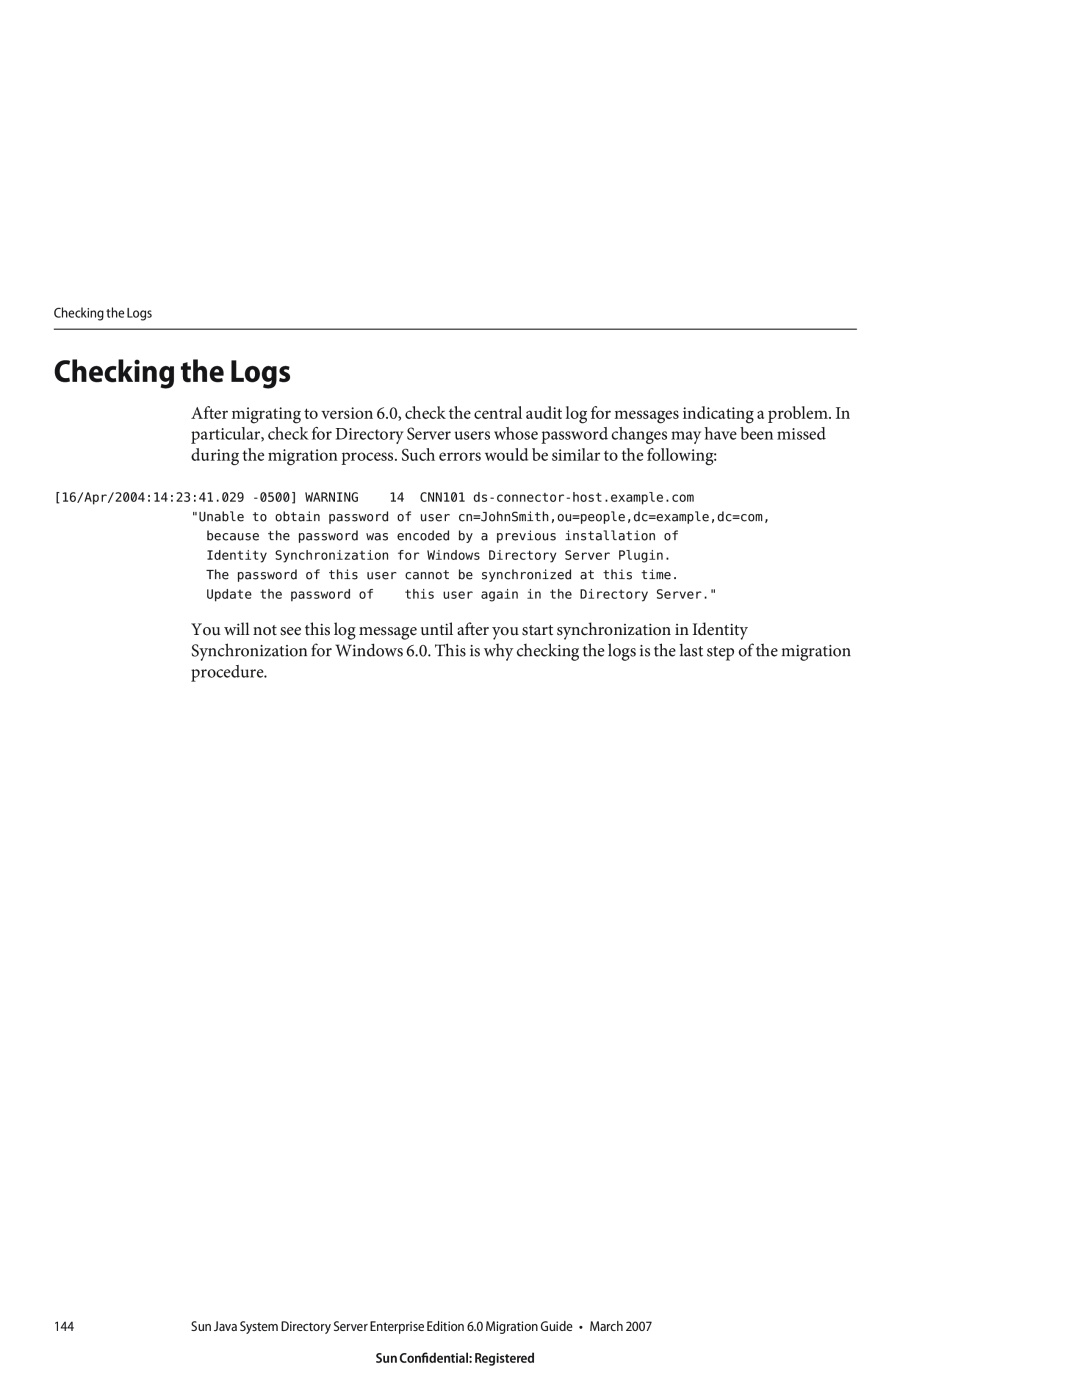 Sun Microsystems 8190994 manual Checking the Logs 